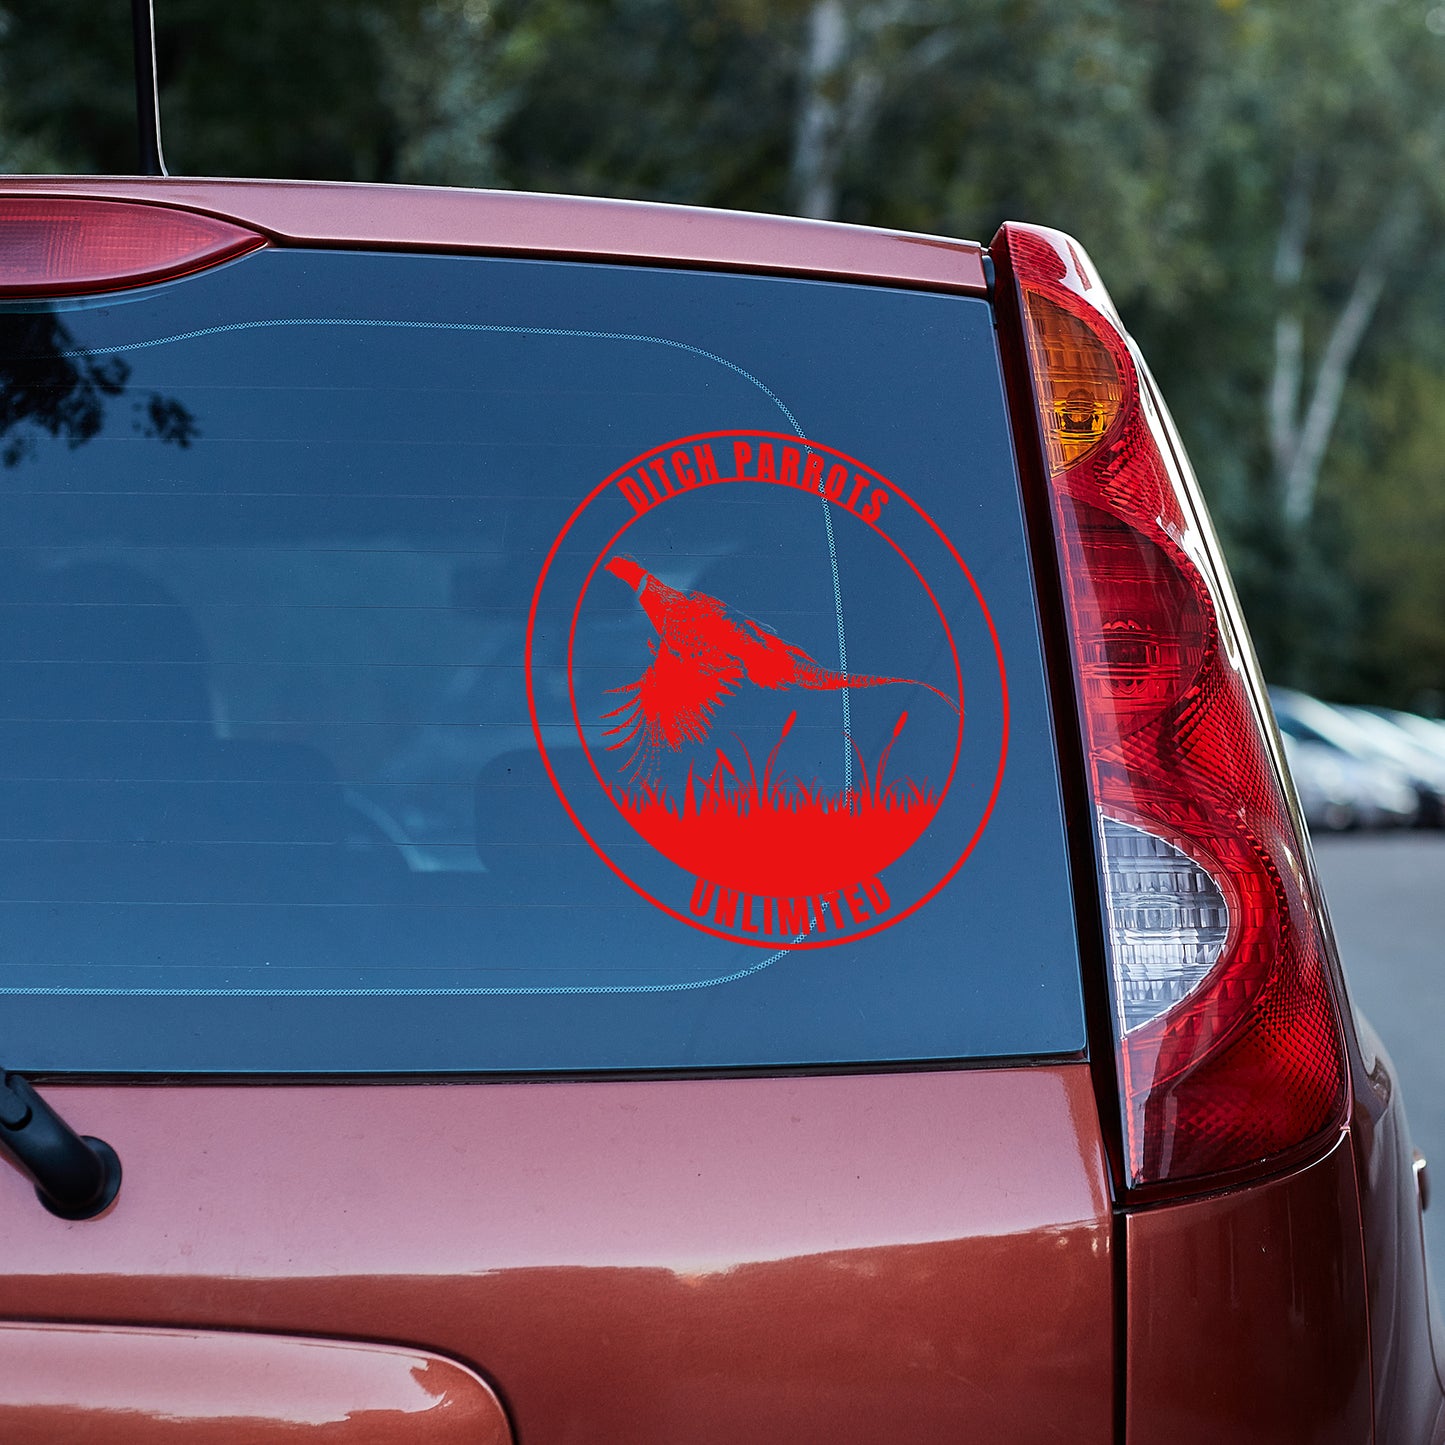 Ditch Parrots Unlimited Vinyl decal decal stickers Decals for cars Decals for Trucks decals for tumblers deer decals for trucks deer hunter hunting hunting decal minivan sticker SUV decals truck decals window decal car Window decals window decor